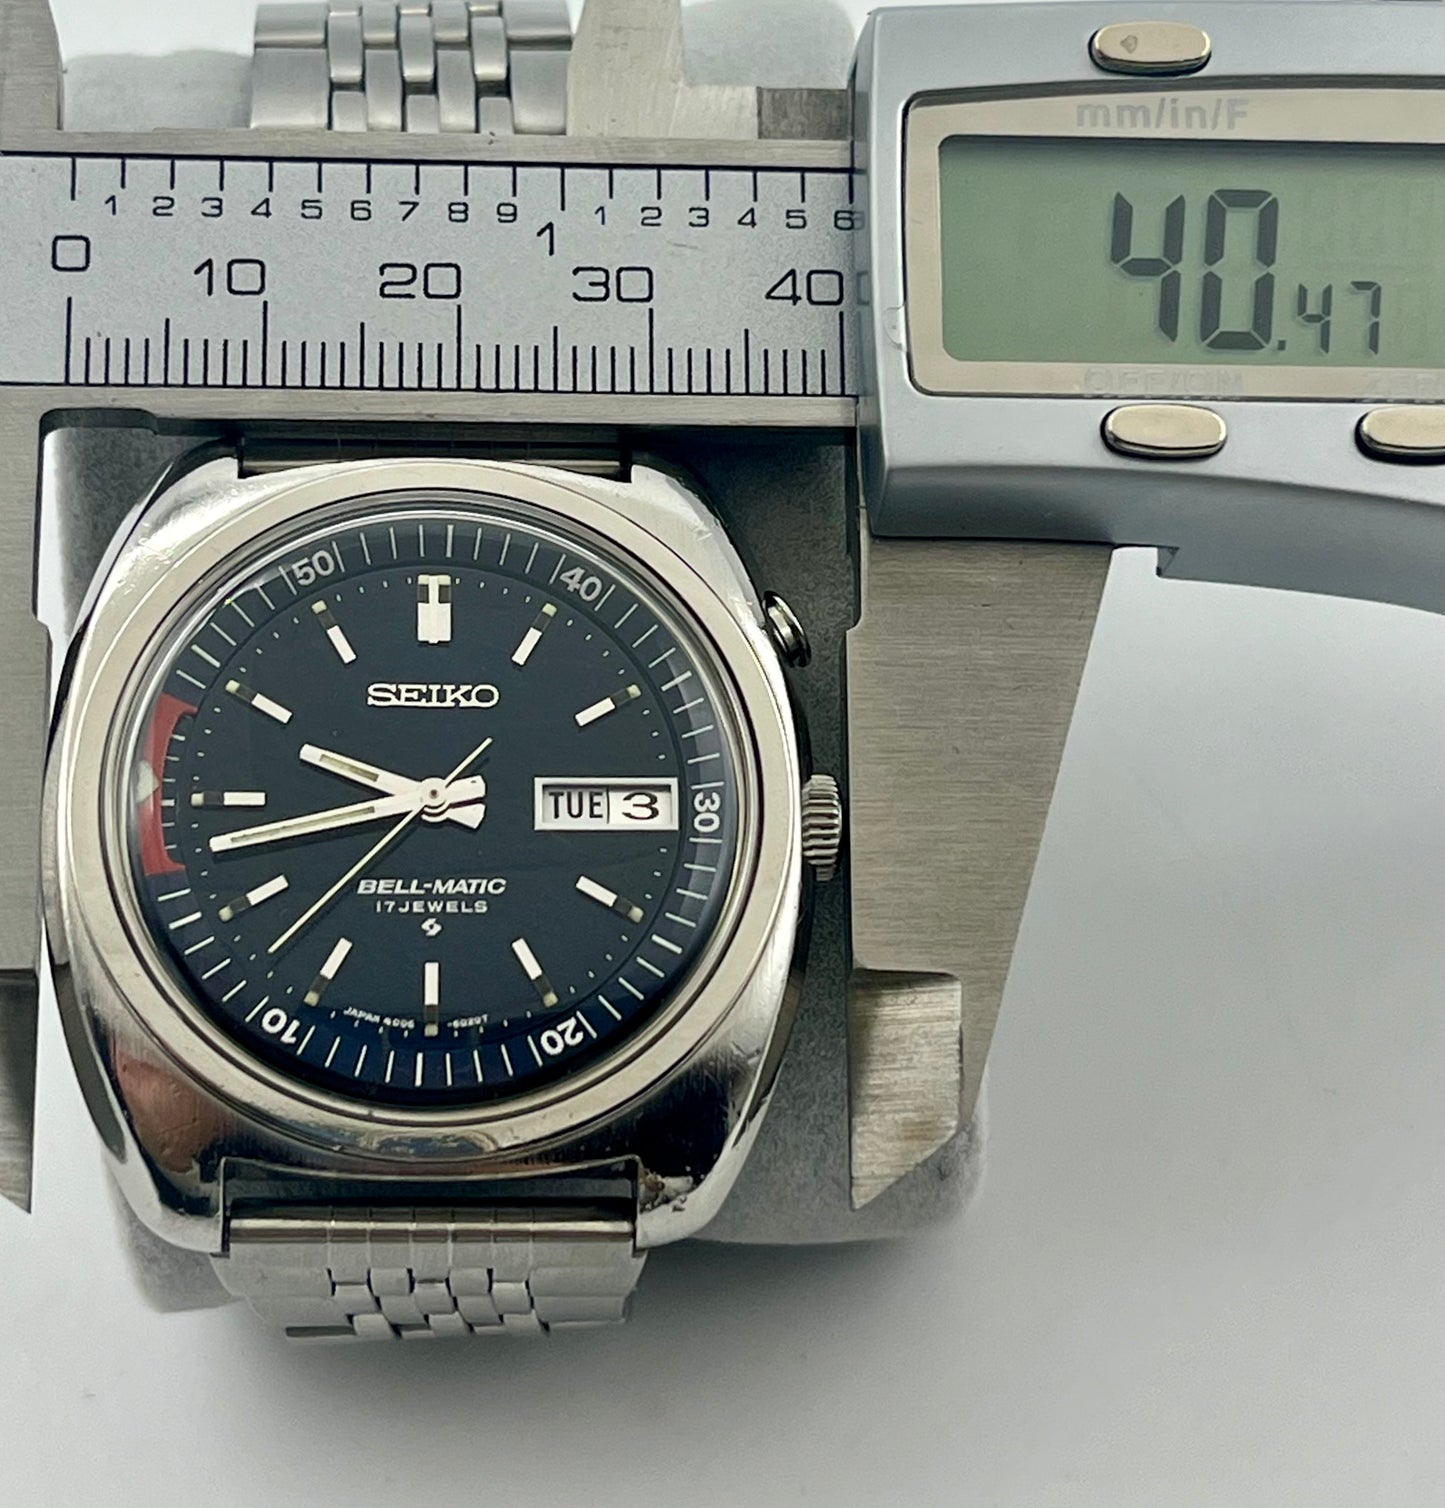 1971 Seiko Bell-Matic Extremely rare